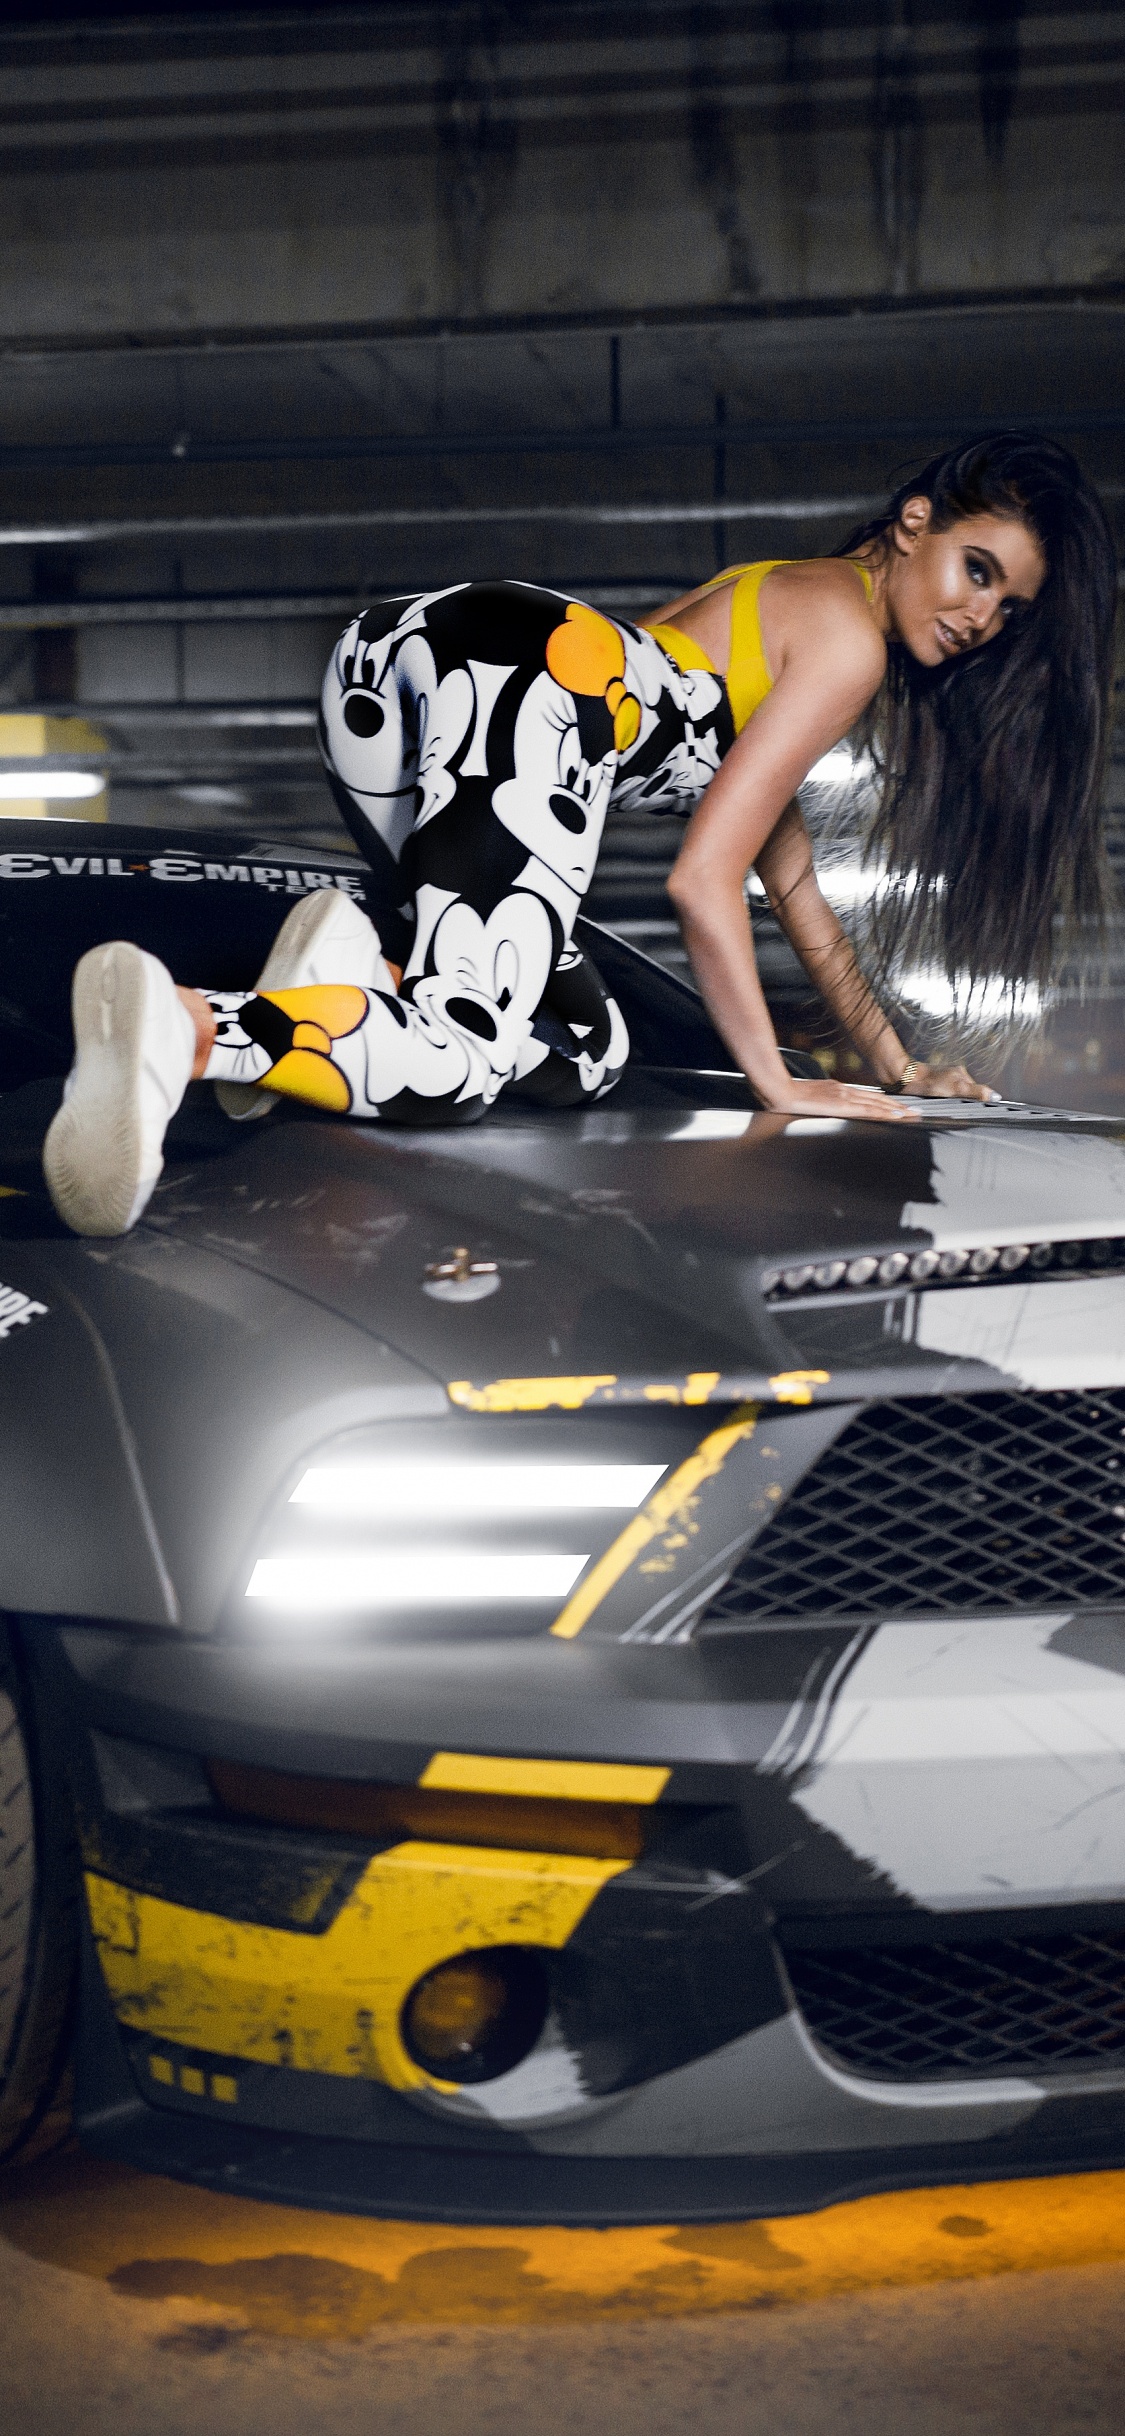 Woman in Black and White Floral Dress Riding on Black and Yellow Sports Car. Wallpaper in 1125x2436 Resolution